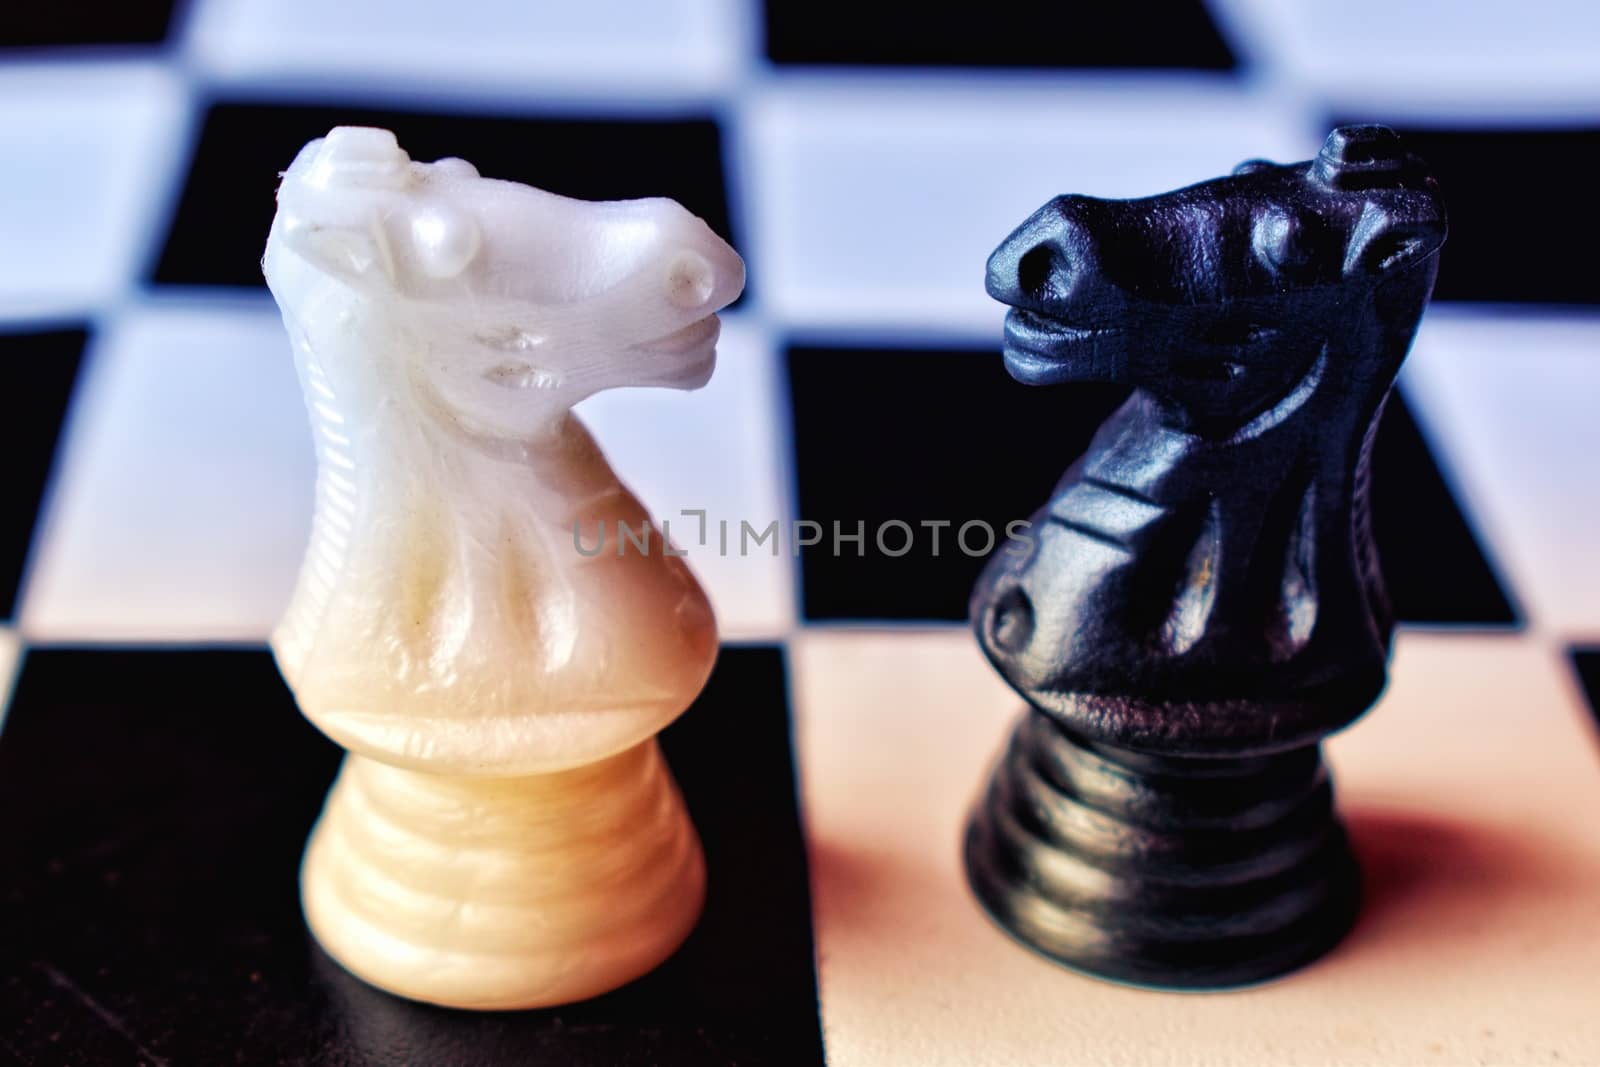 Black and white horse chess piece by kundanmondal1999